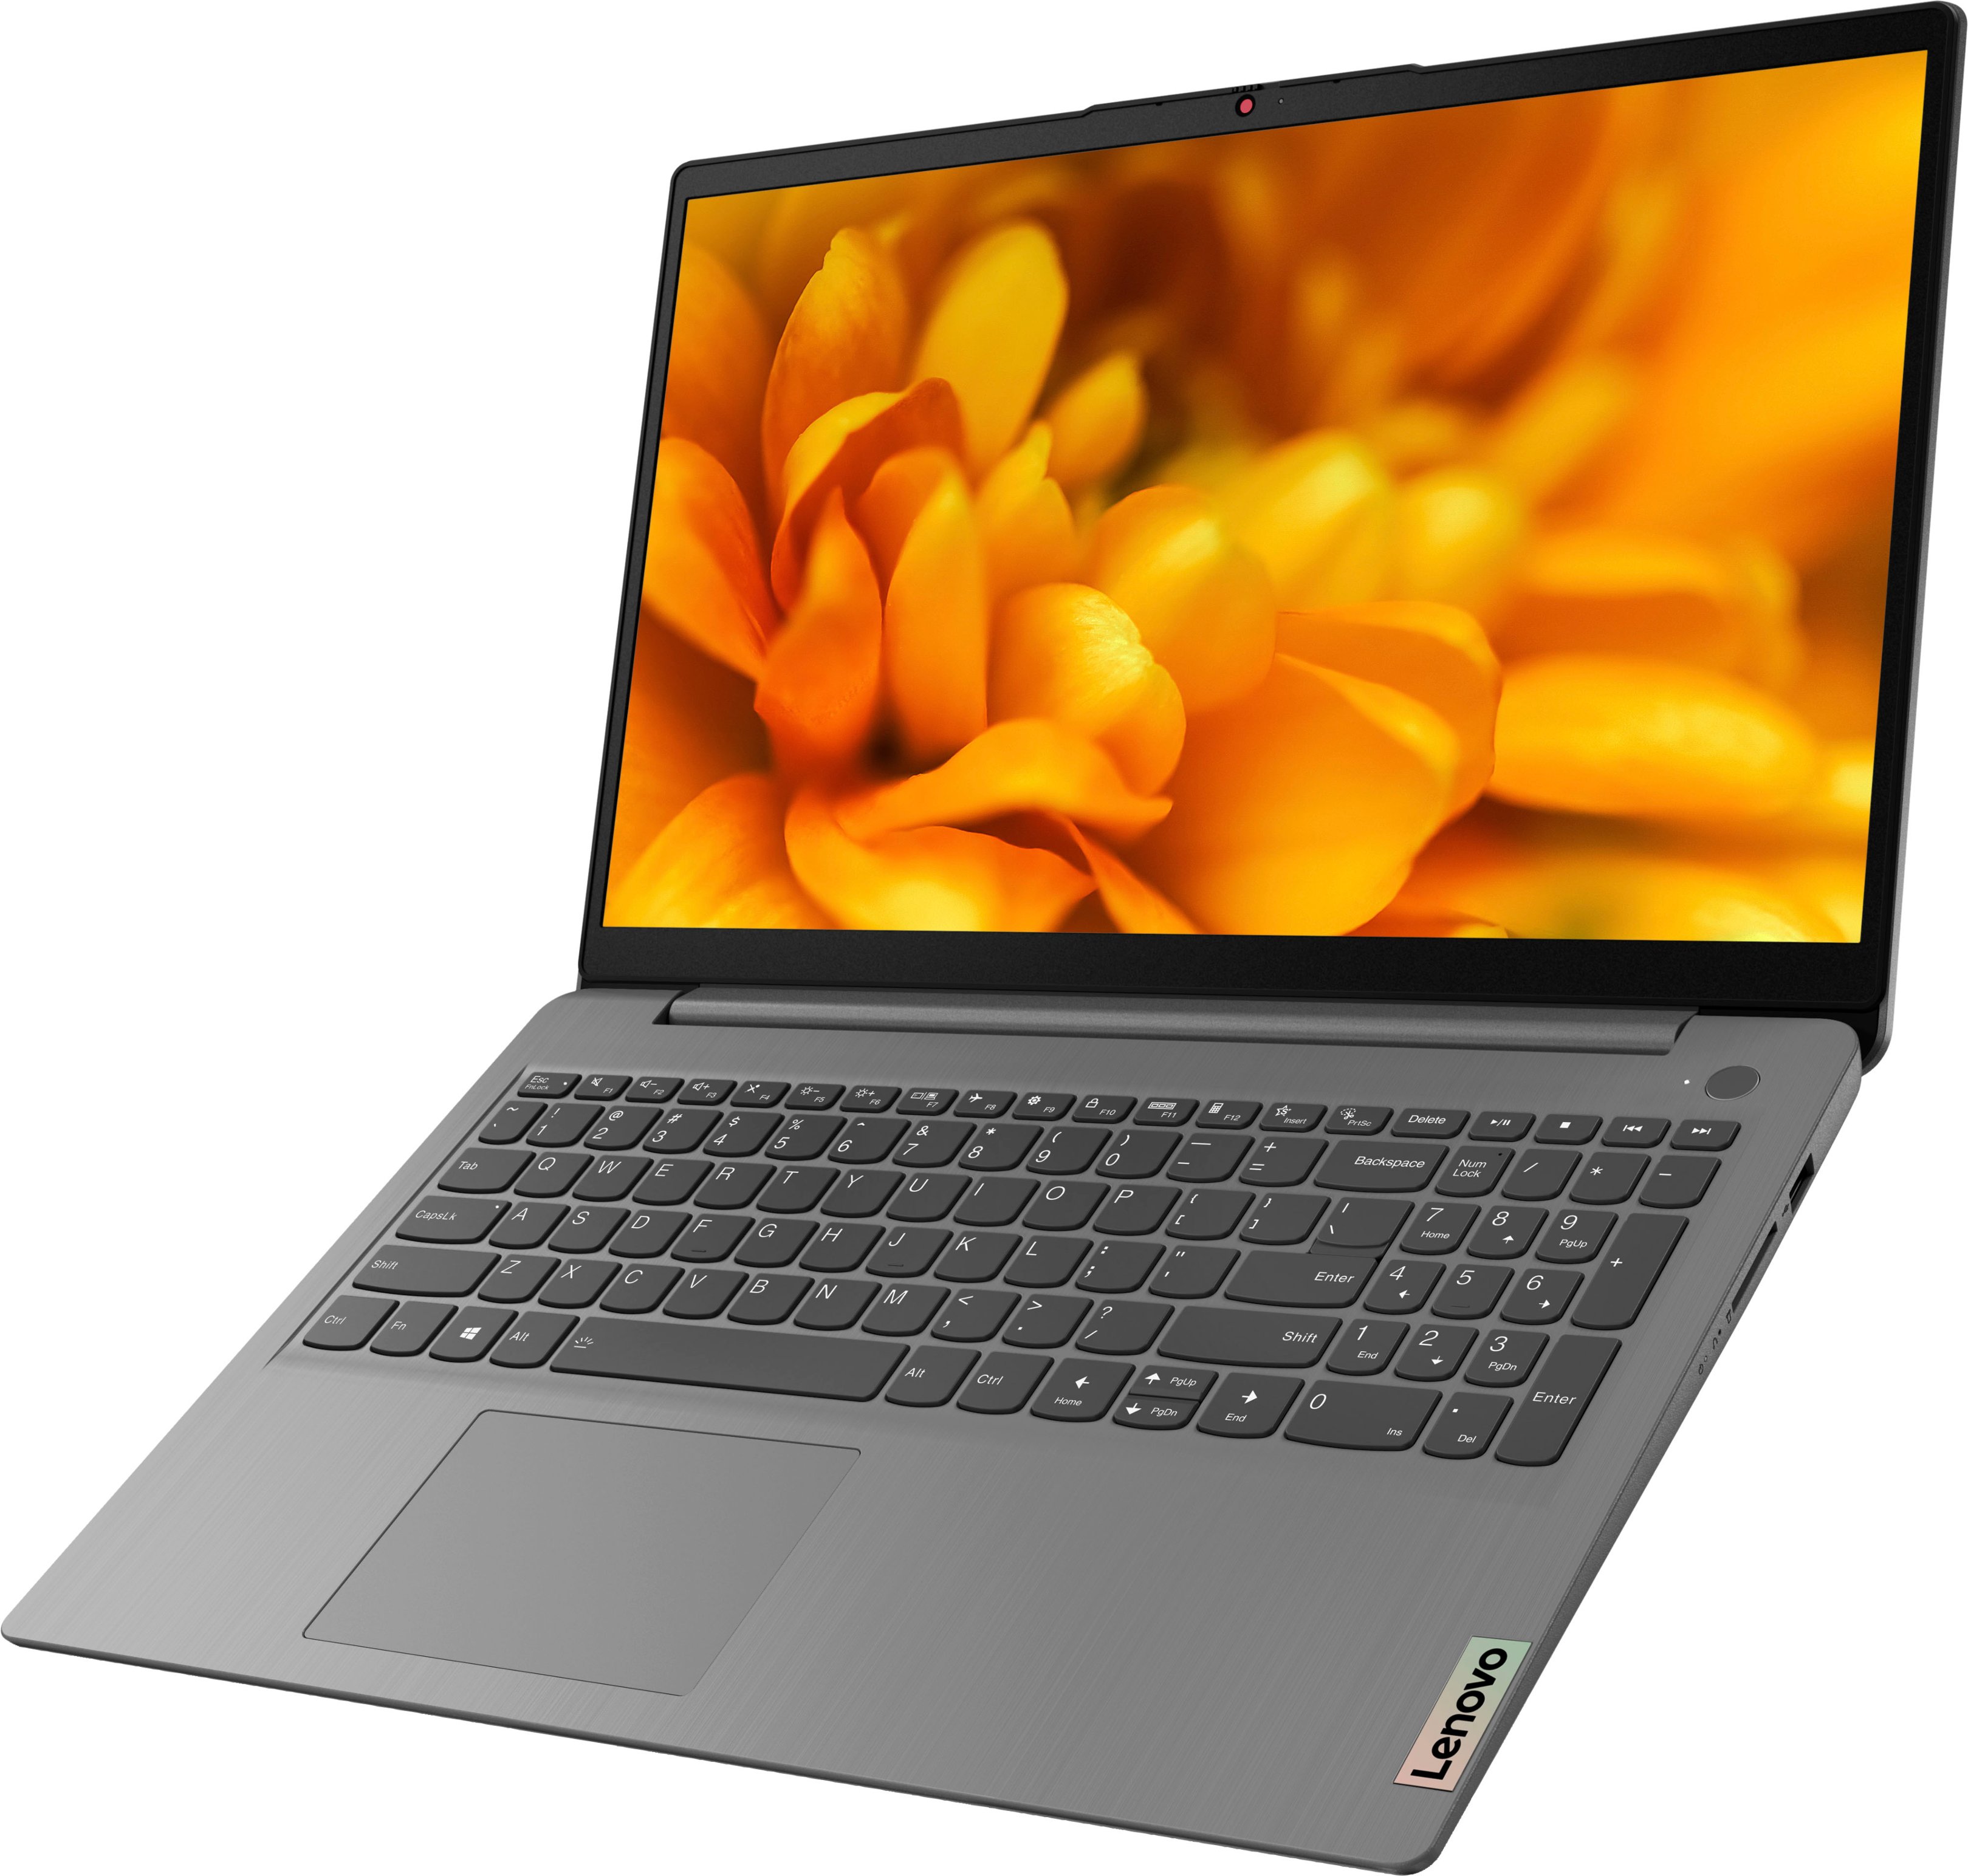 Lenovo - Ideapad 3i 15.6" FHD Touch Laptop - Core i5-1135G7 with 8GB Memory - 512GB SSD - Arctic Grey